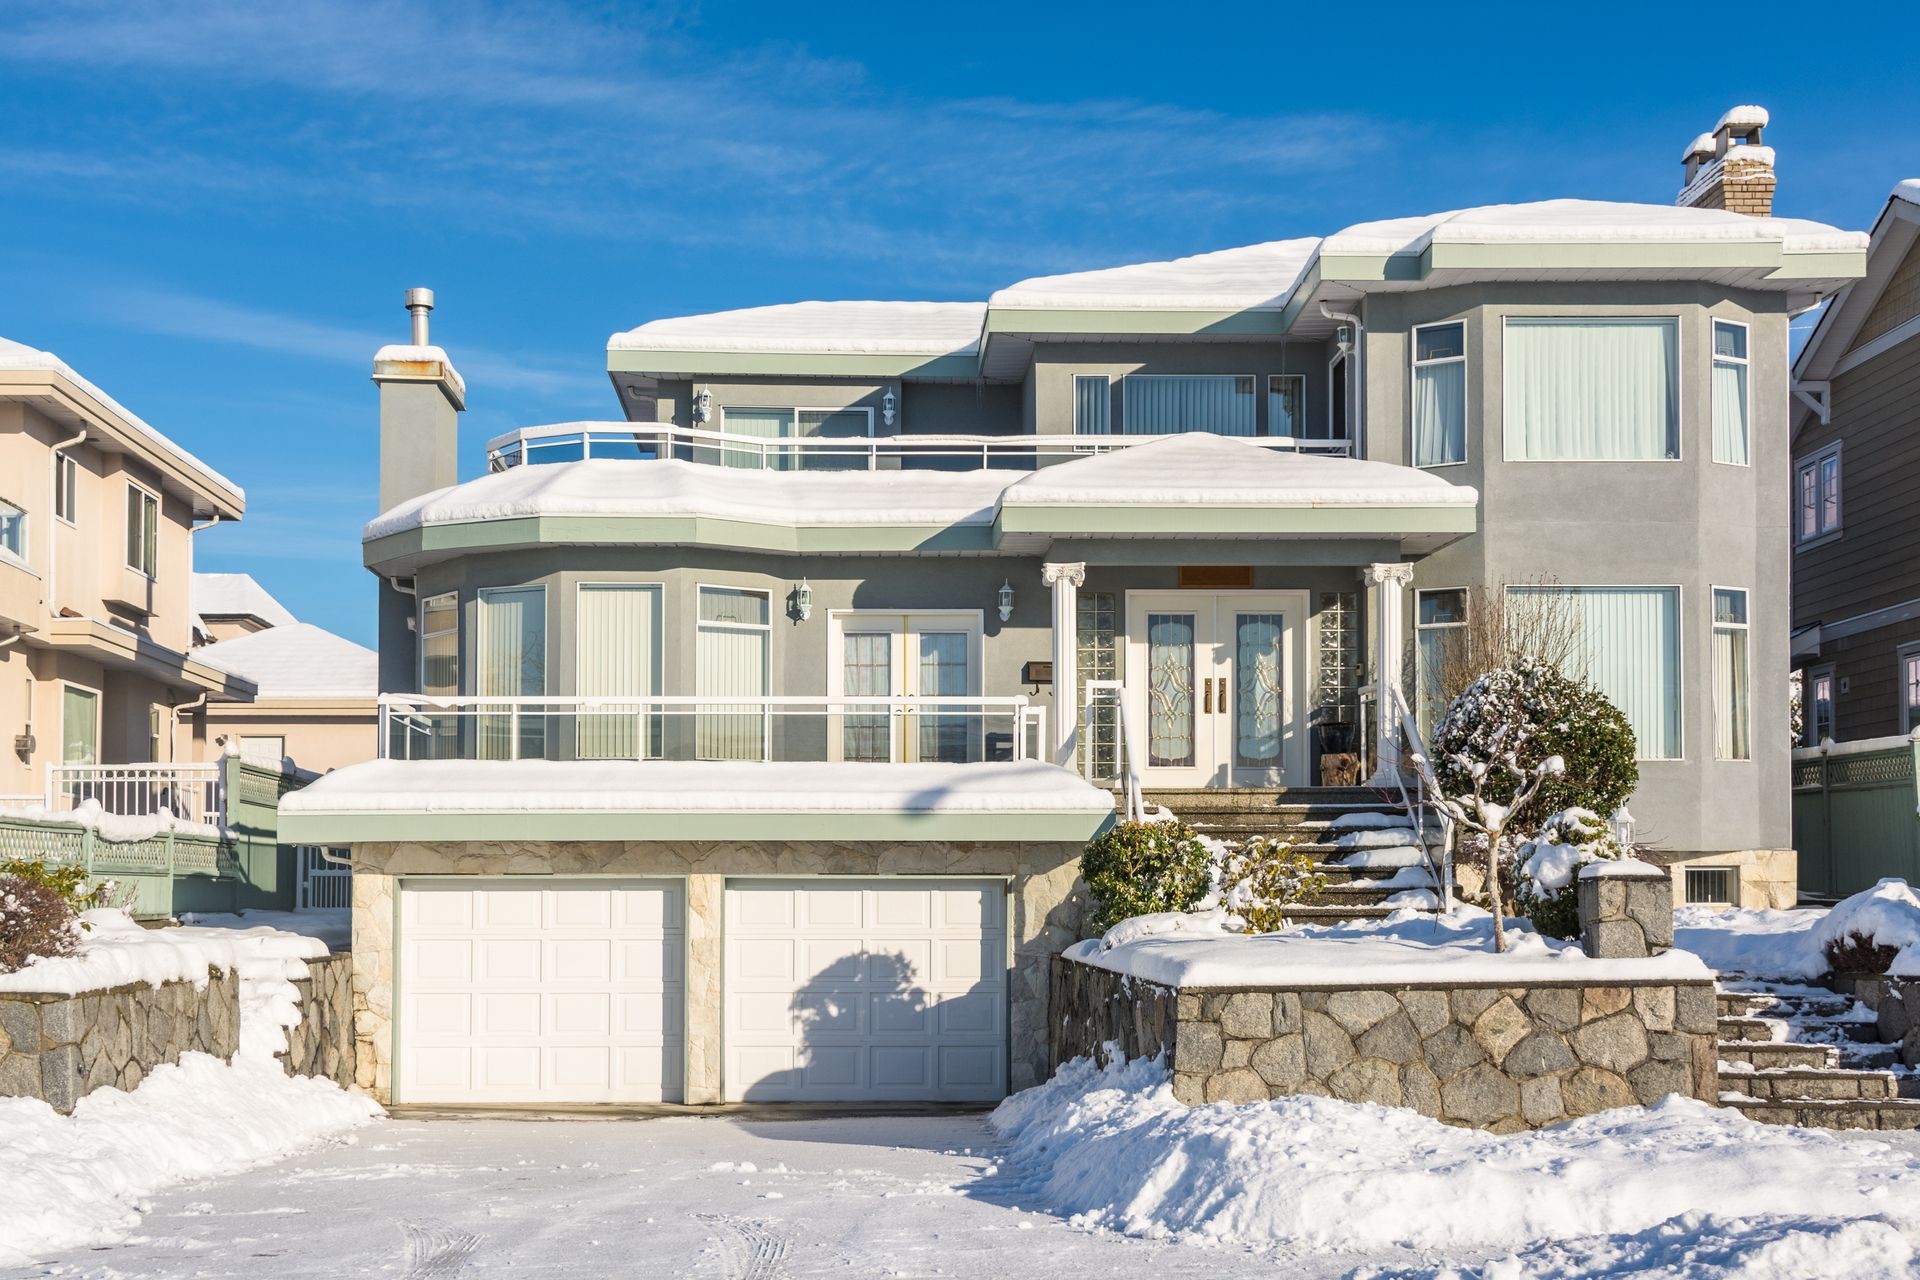 Big luxury residential house in winter season. North American family house on winter sunny day